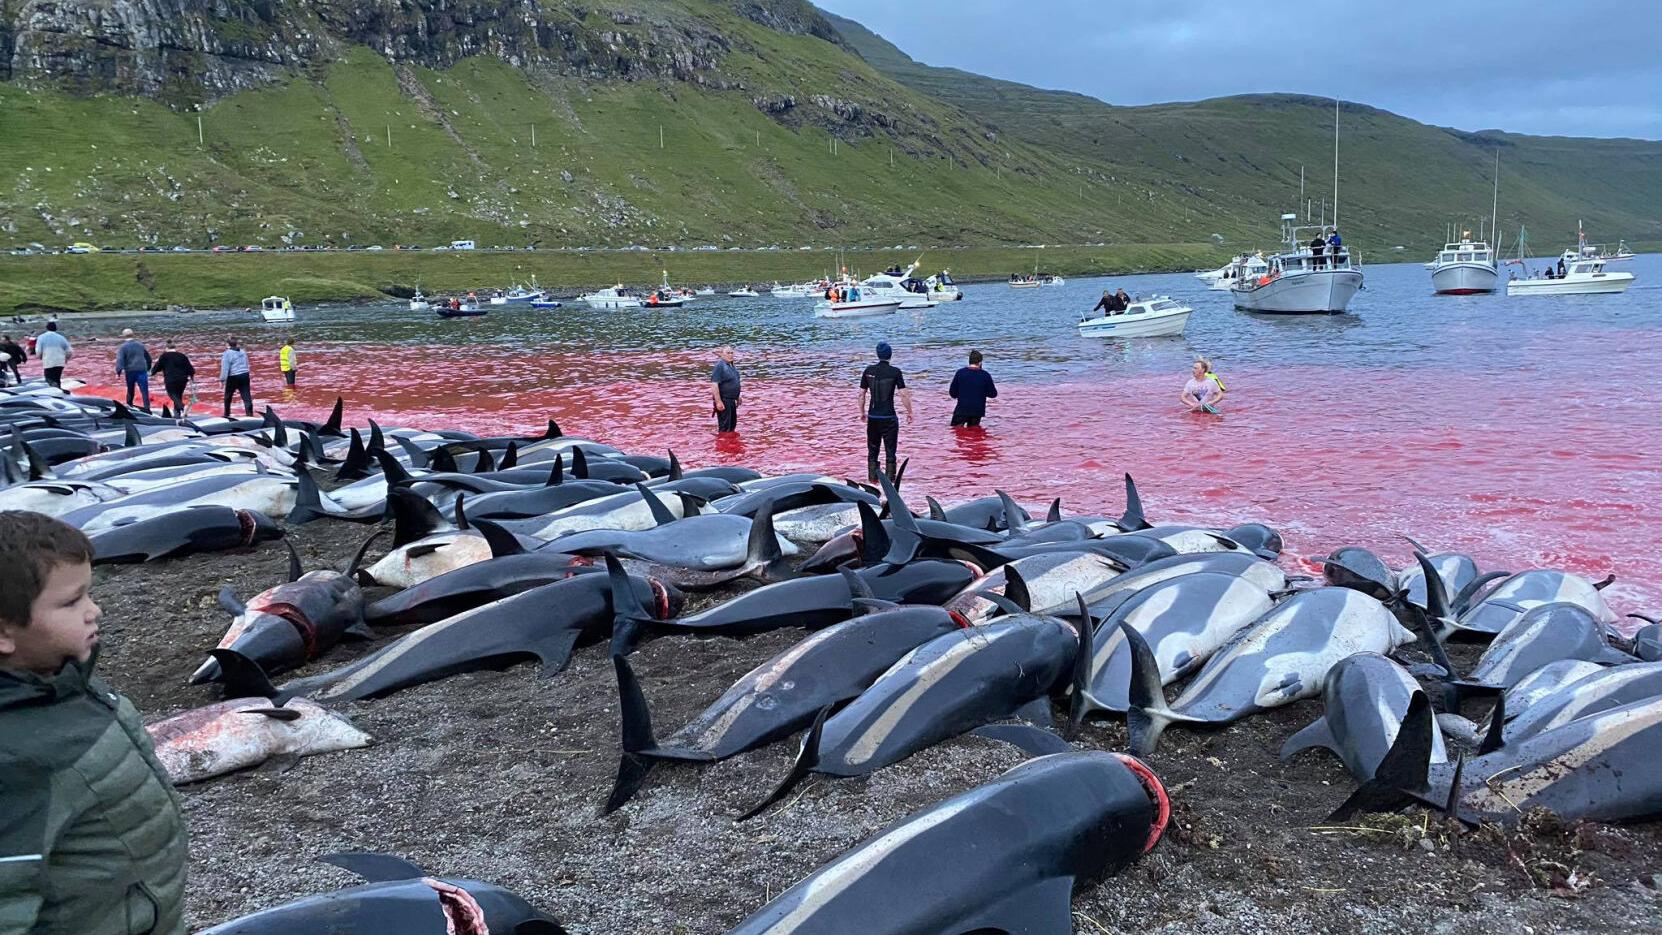 Anger over killing of 1,400 dolphins in one day